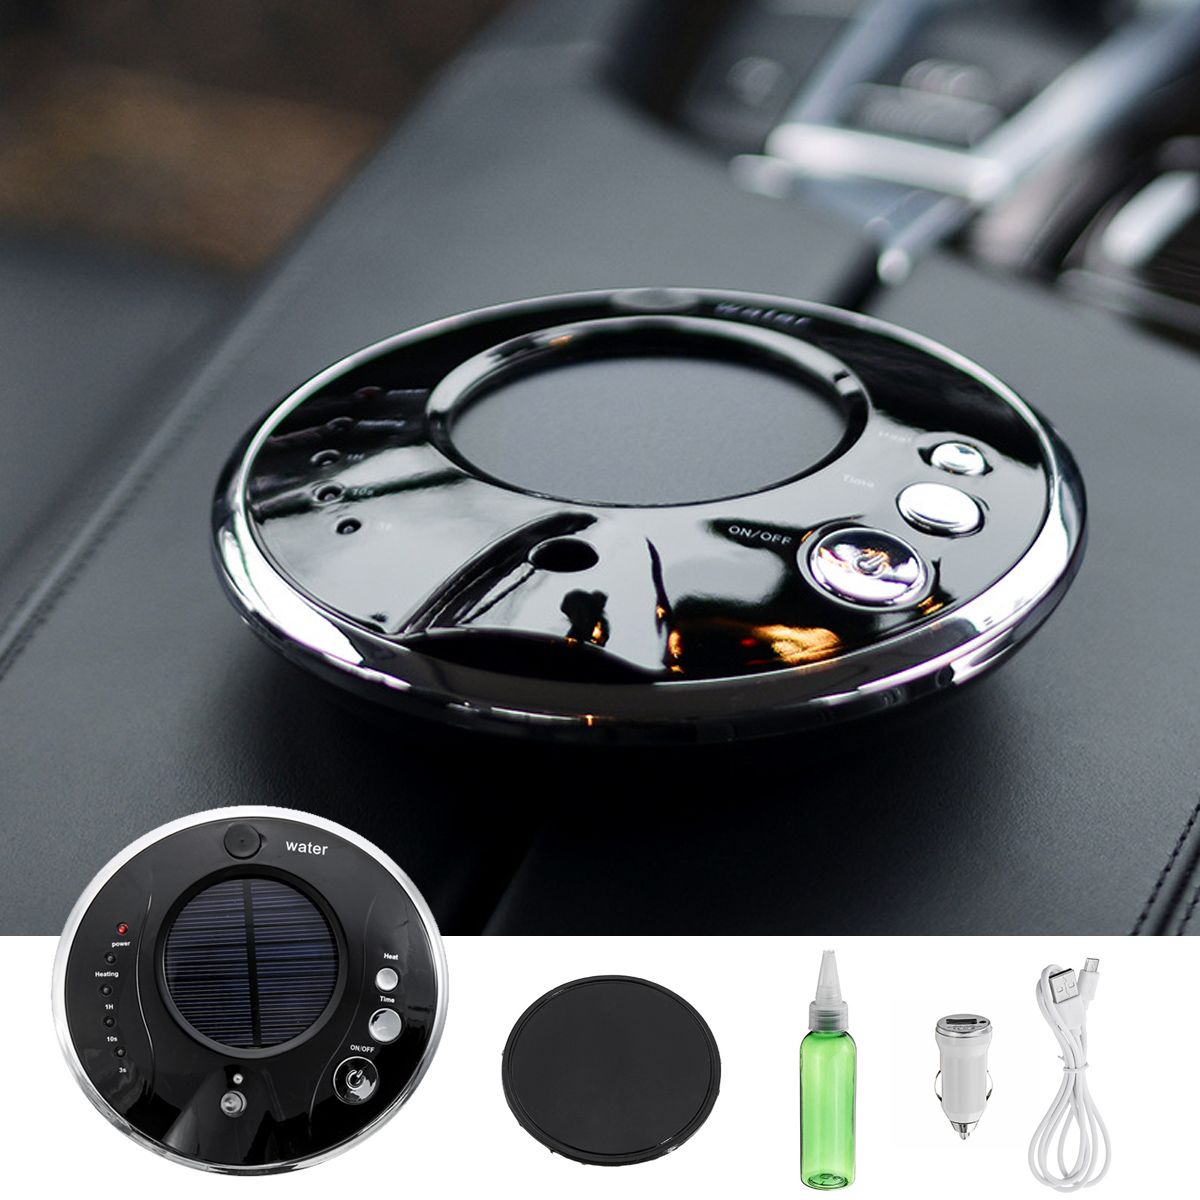 Car-Solar-Powered-Negative-Ion-Air-Purifier-5V-Cleaner-Purifier-humidification-1670794